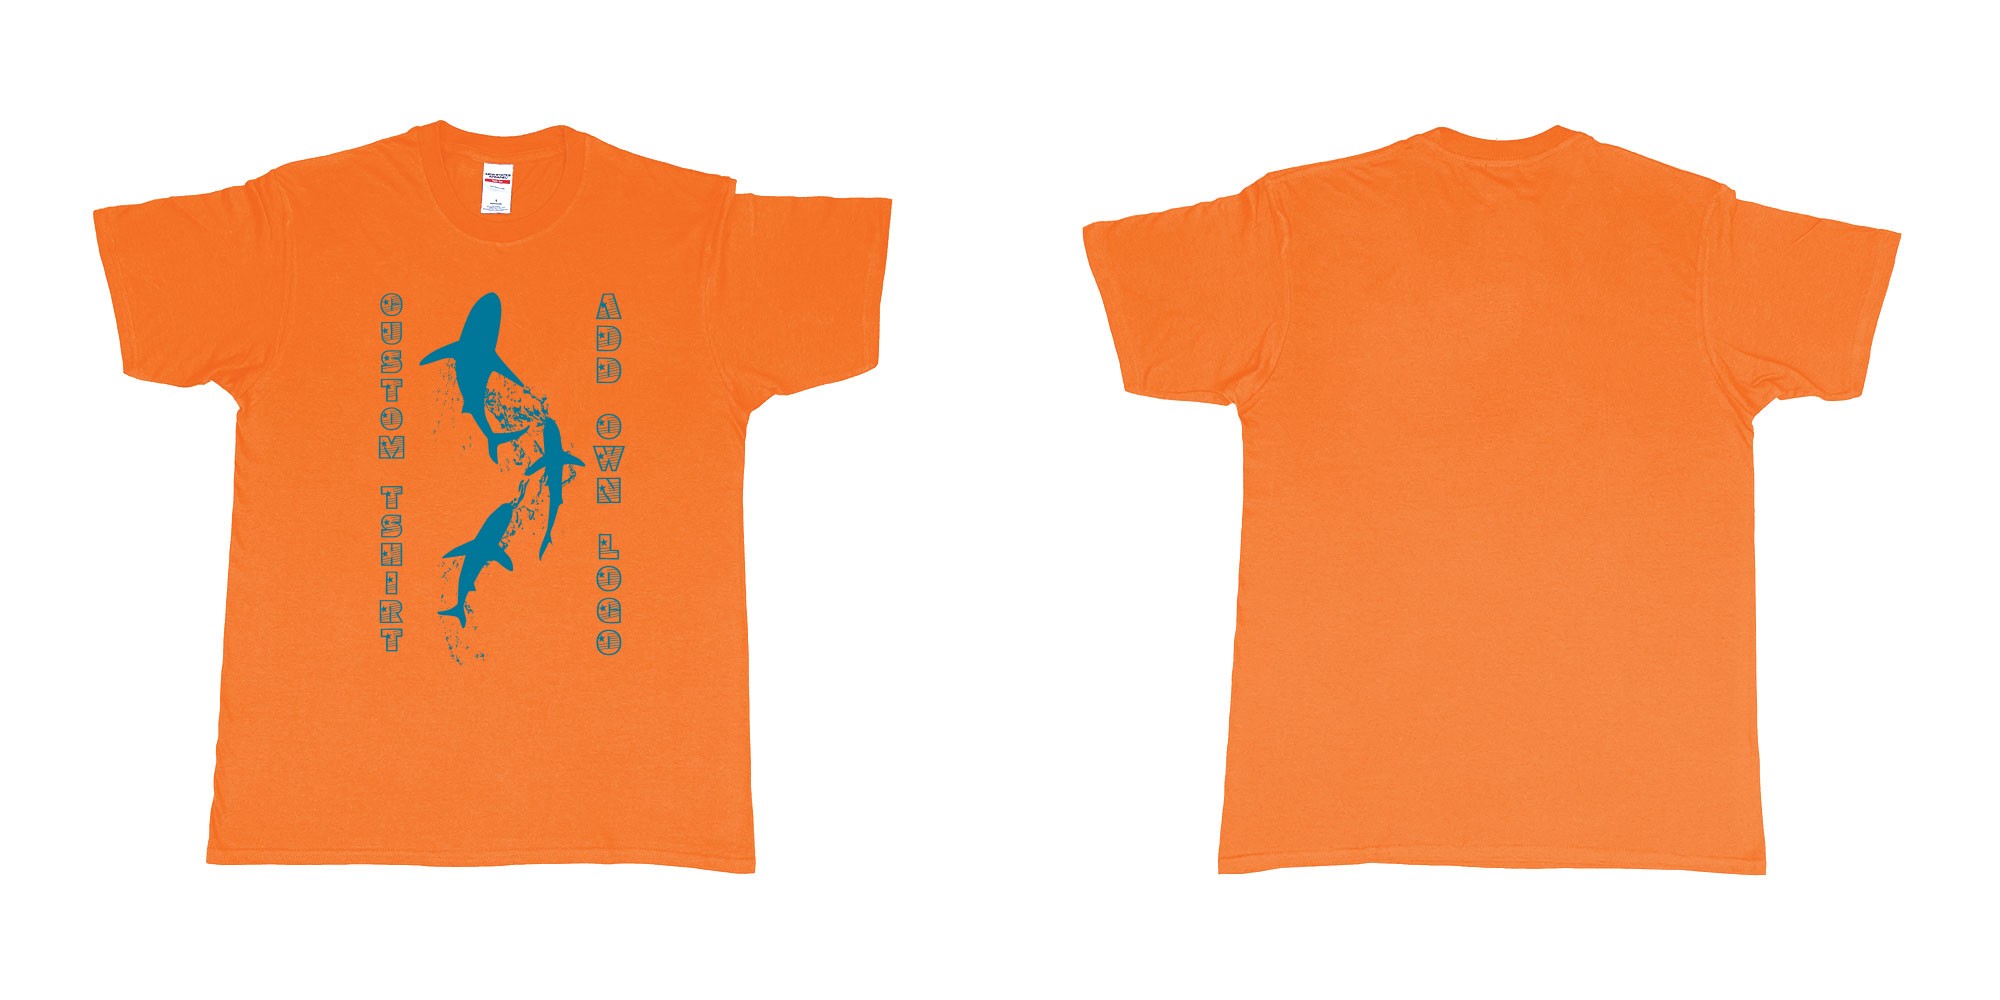 Custom tshirt design three shark siluetts scuba diving teeshirt in fabric color orange choice your own text made in Bali by The Pirate Way